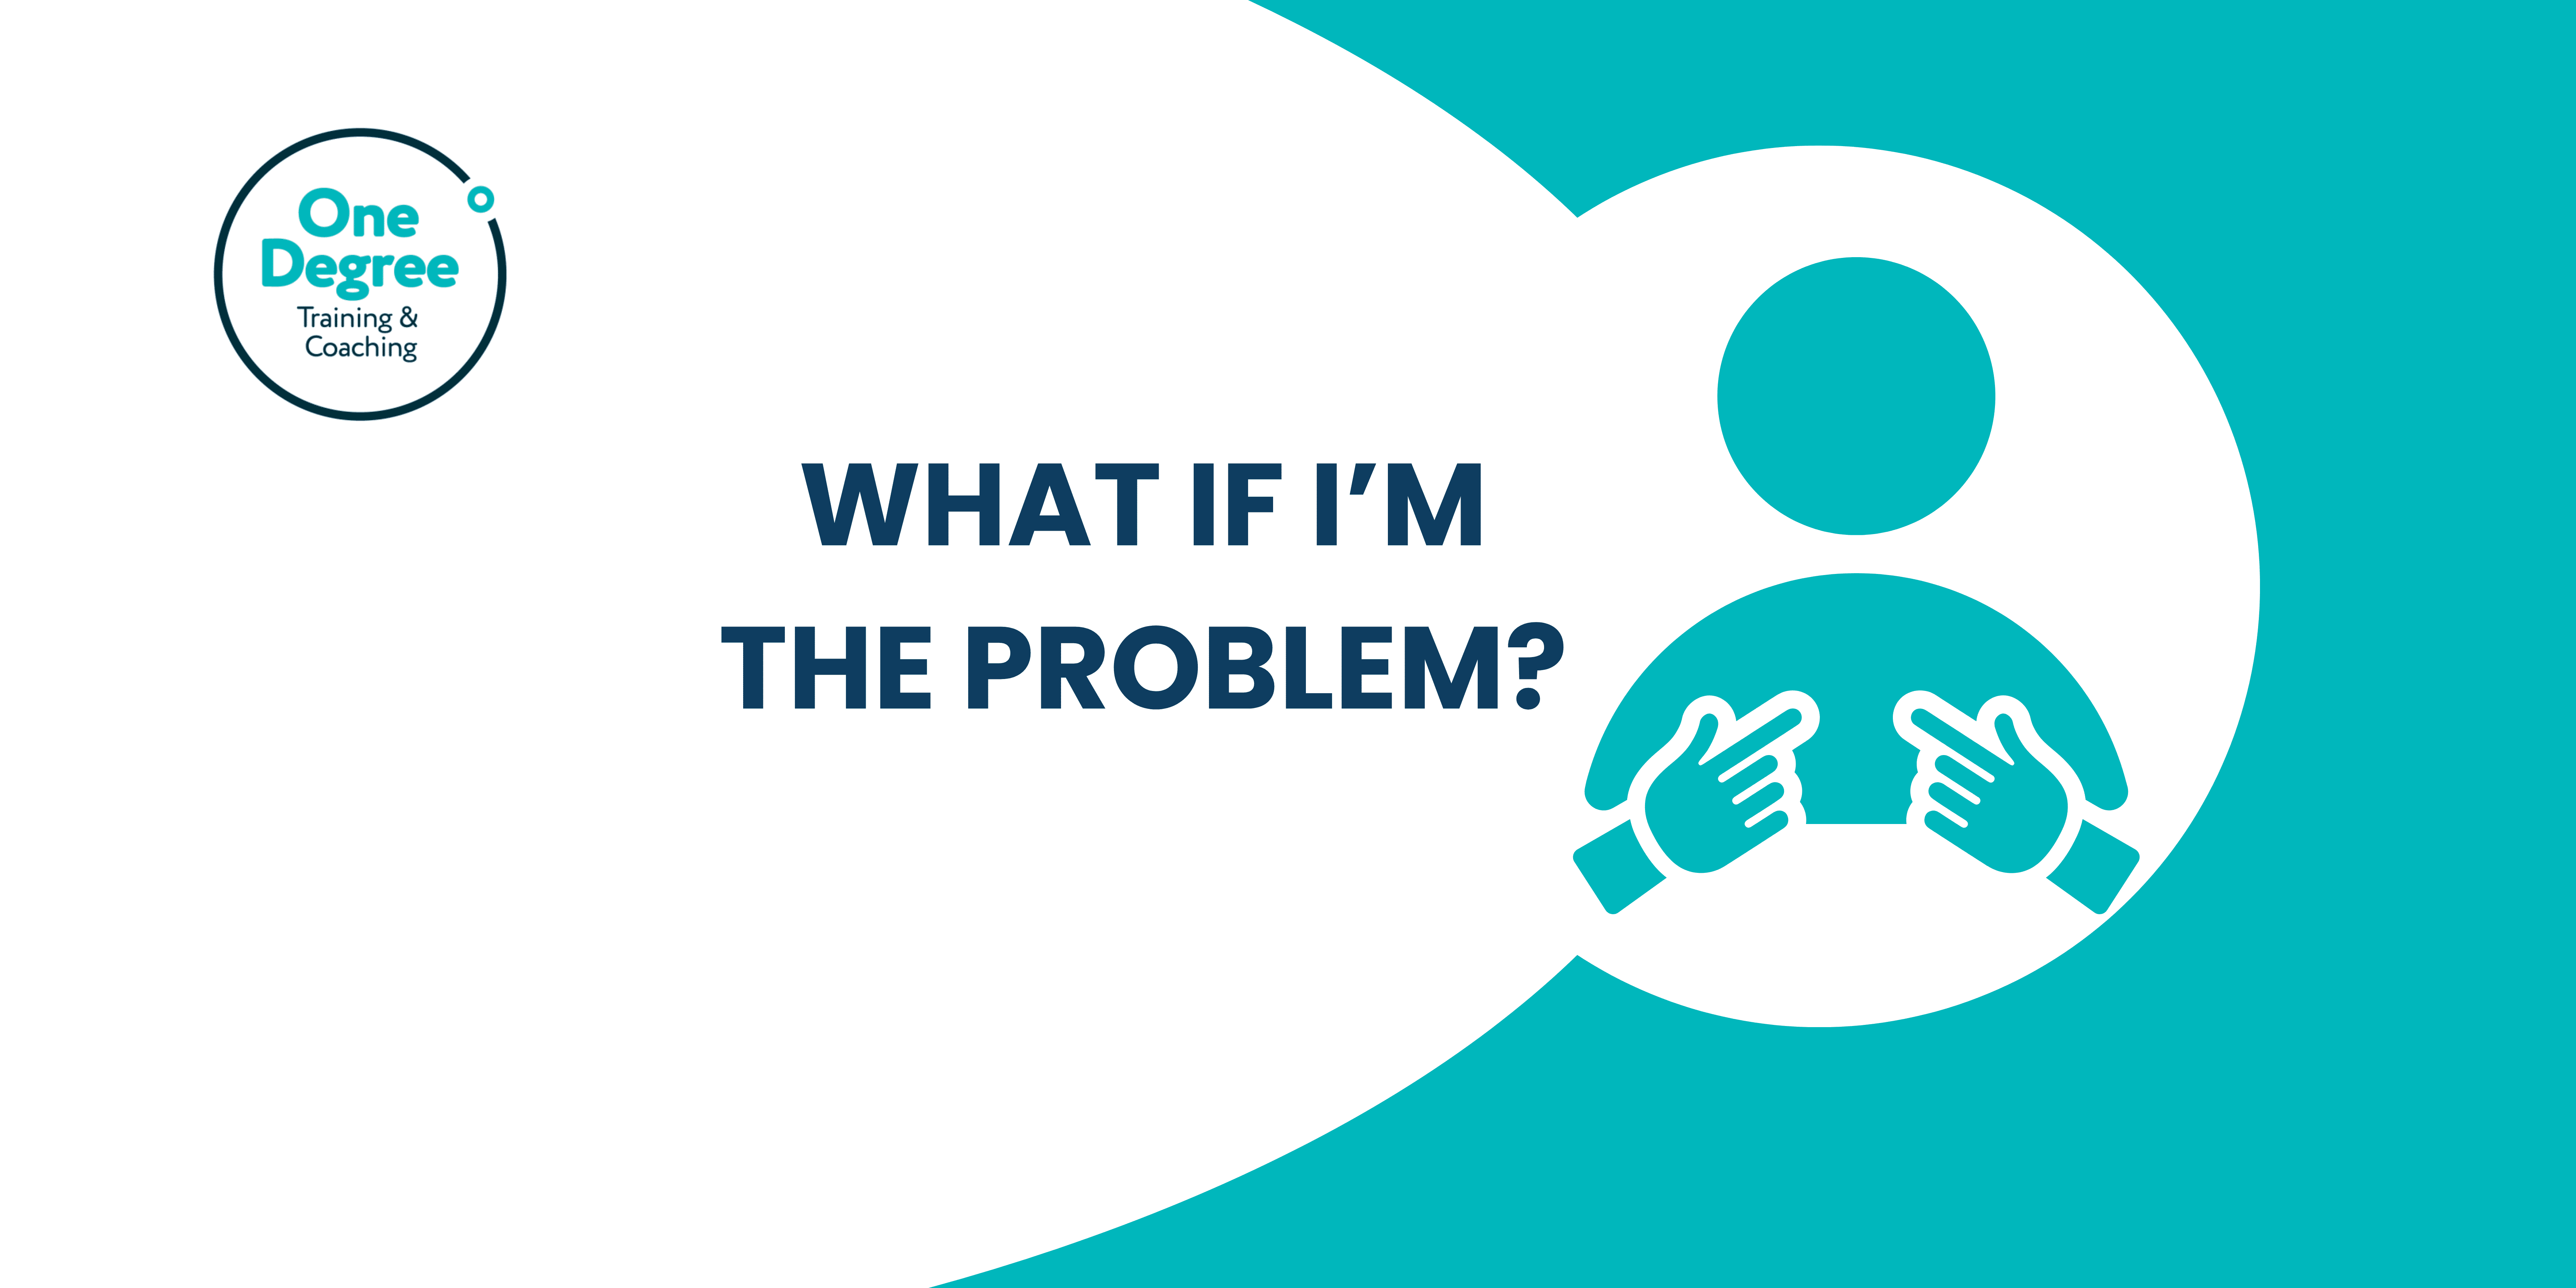 What if I’m the problem? Every problem in business is a leadership problem.